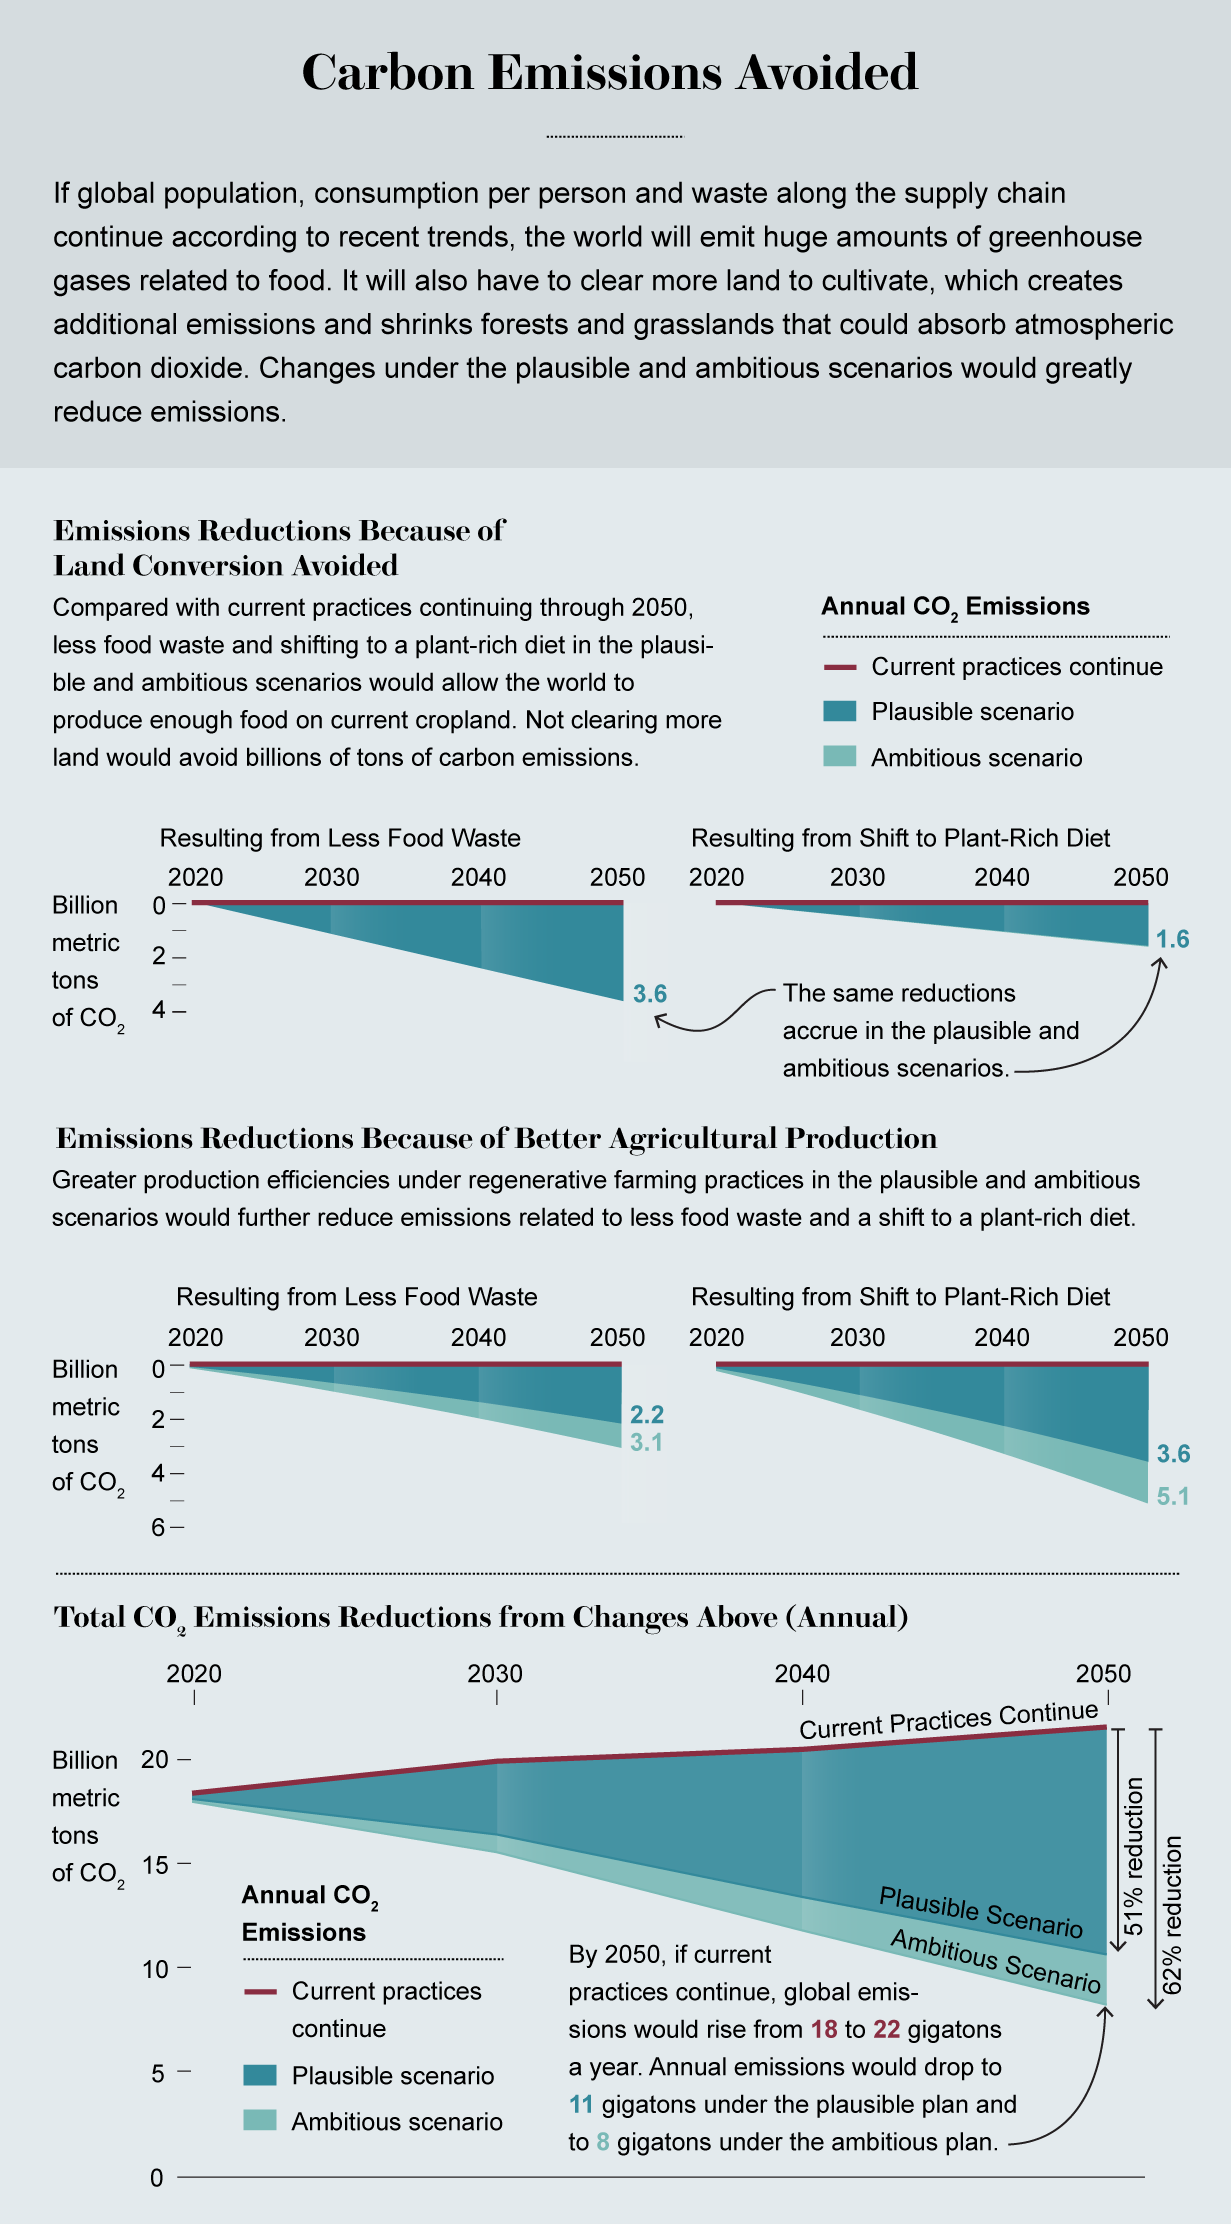 Graphic shows potential carbon emissions reductions from 2020 to 2050 due to less food waste or shift to a plant-rich diet.